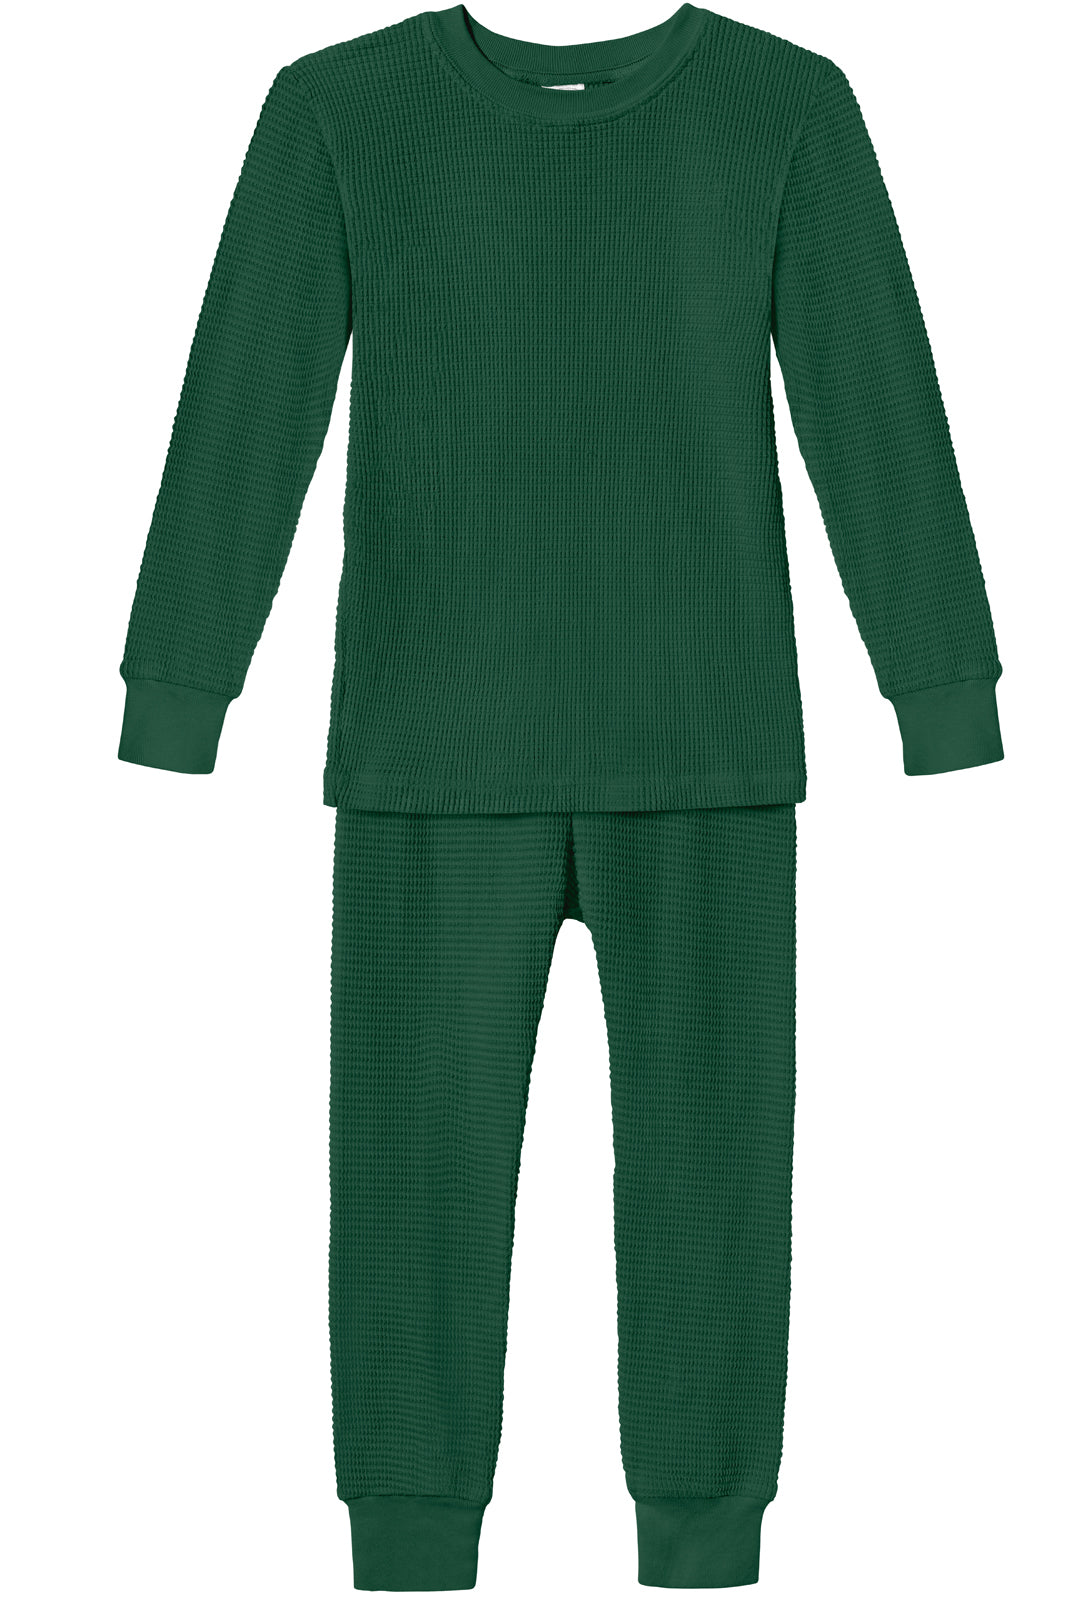 Boys and Girls 100% Cotton Soft &amp; Warm Heavier Thermal Long John Set | Forest Green